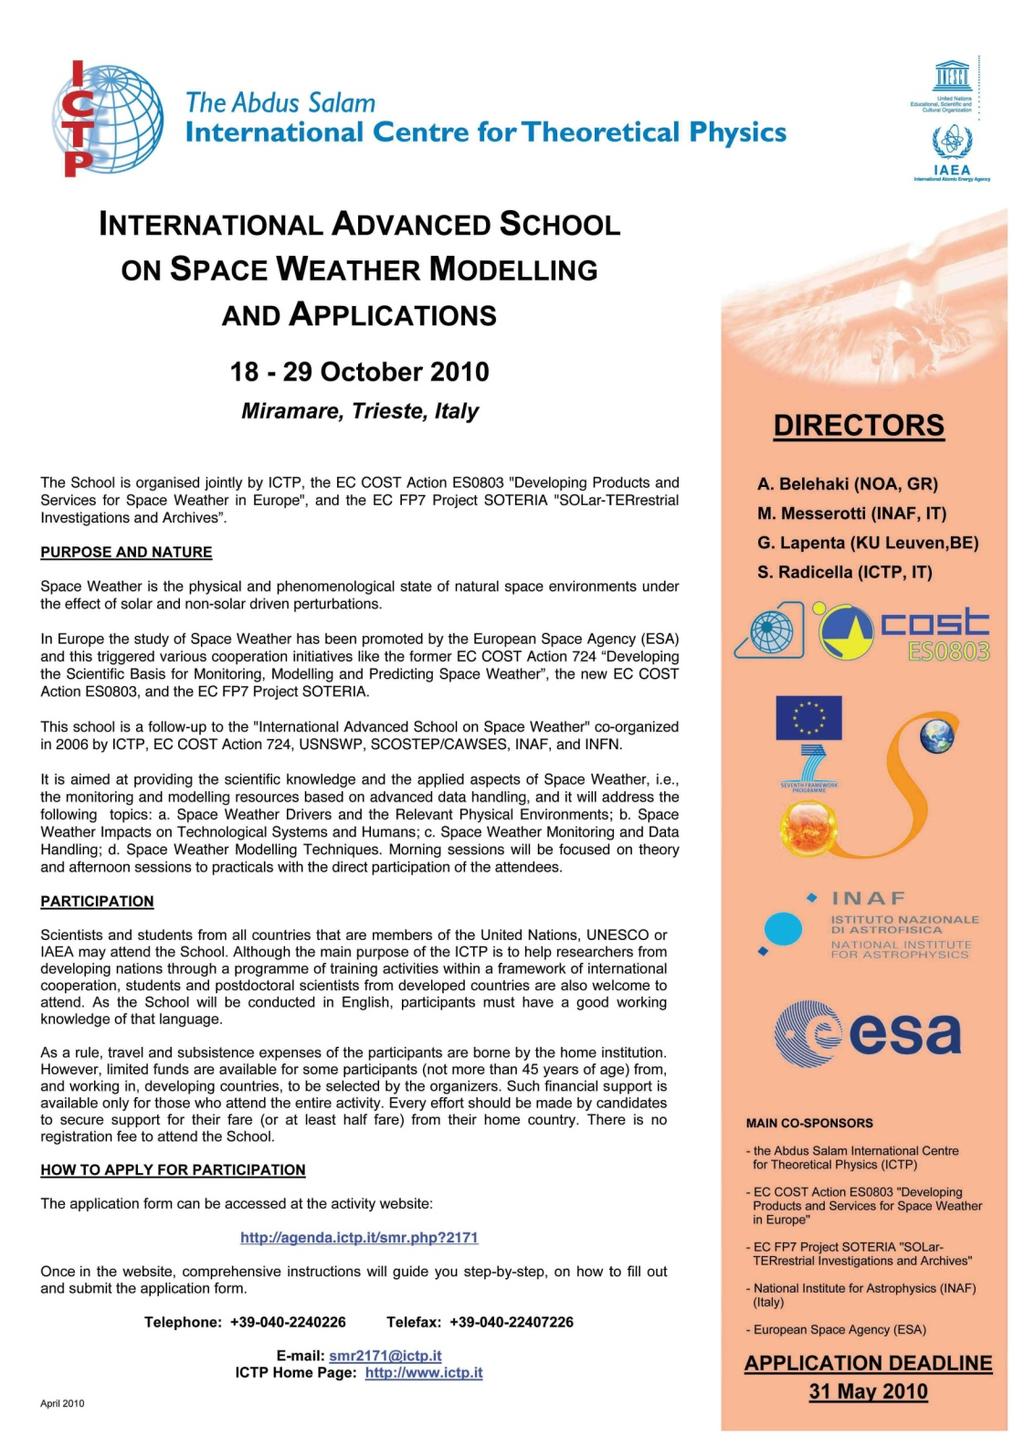 Outcome and achievements (2/3) International Advanced School on Space Weather Modelling and Applications jointly